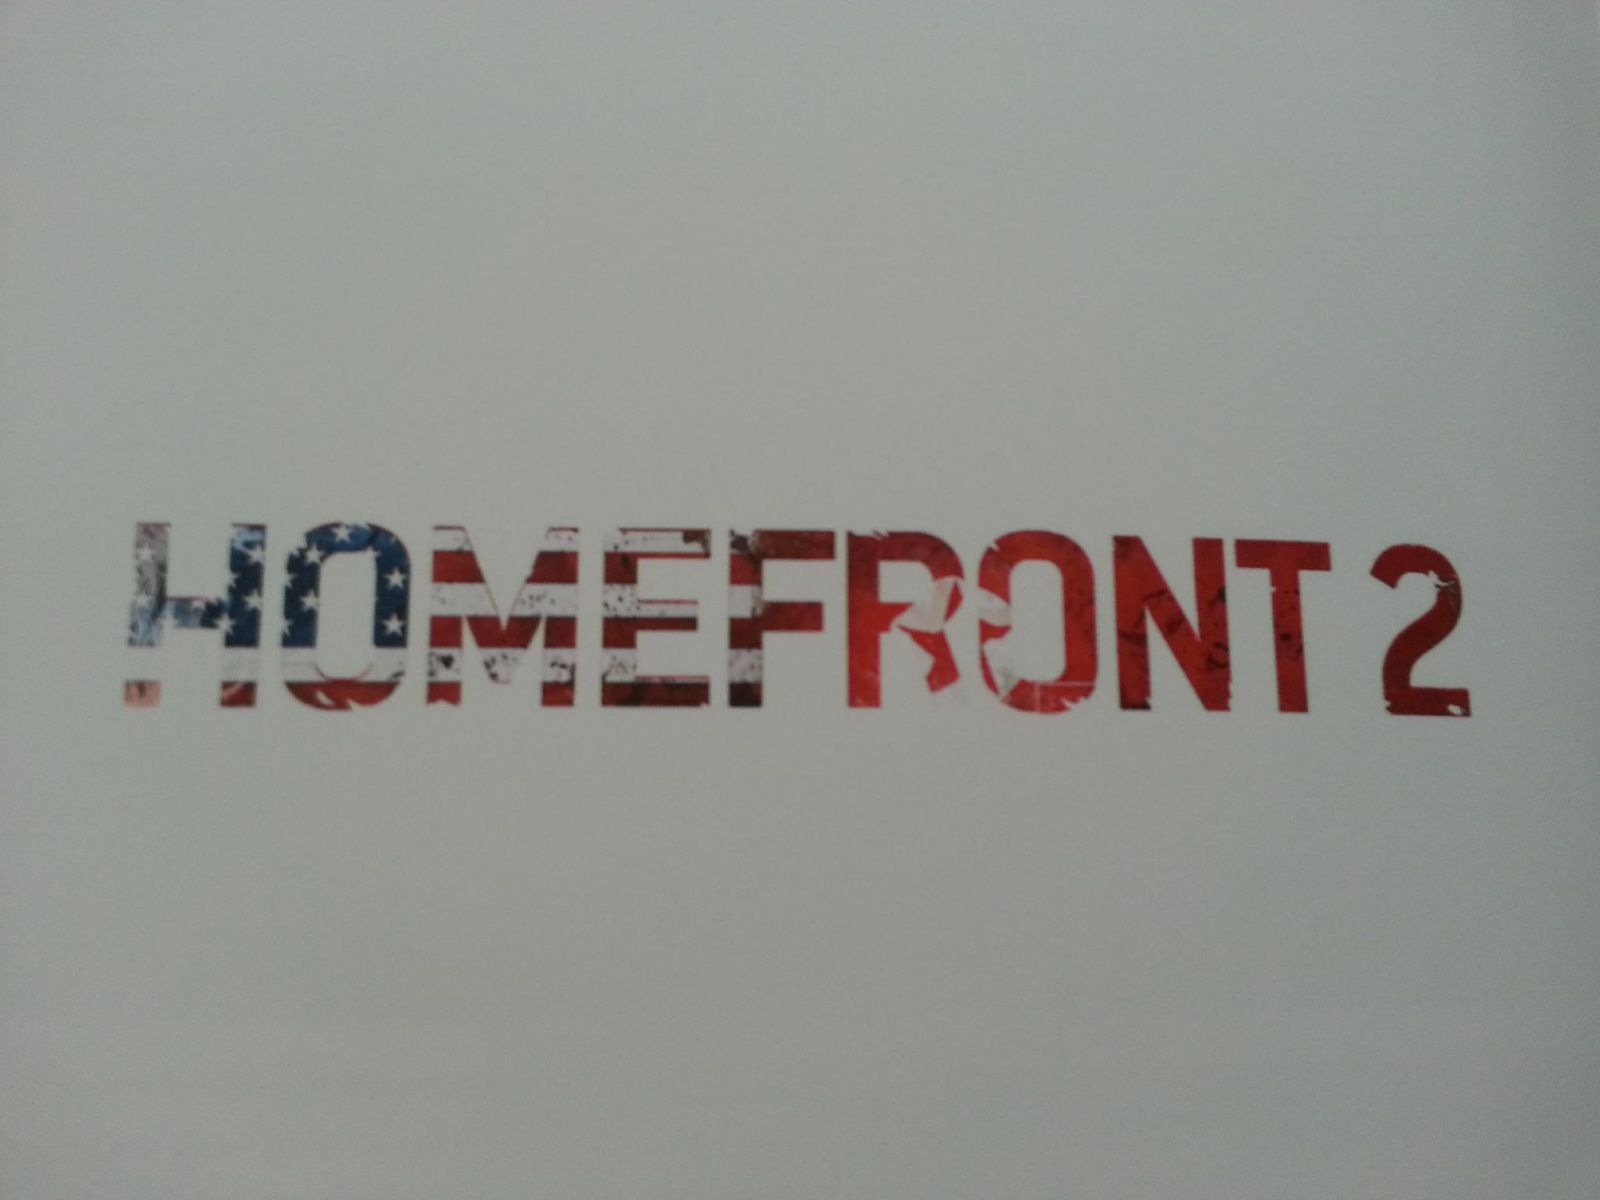 Media asset in full size related to 3dfxzone.it news item entitled as follows: Prime immagini del first-person shooter Homefront 2 di Crytek | Image Name: news20189_Homefront-2_3.jpg